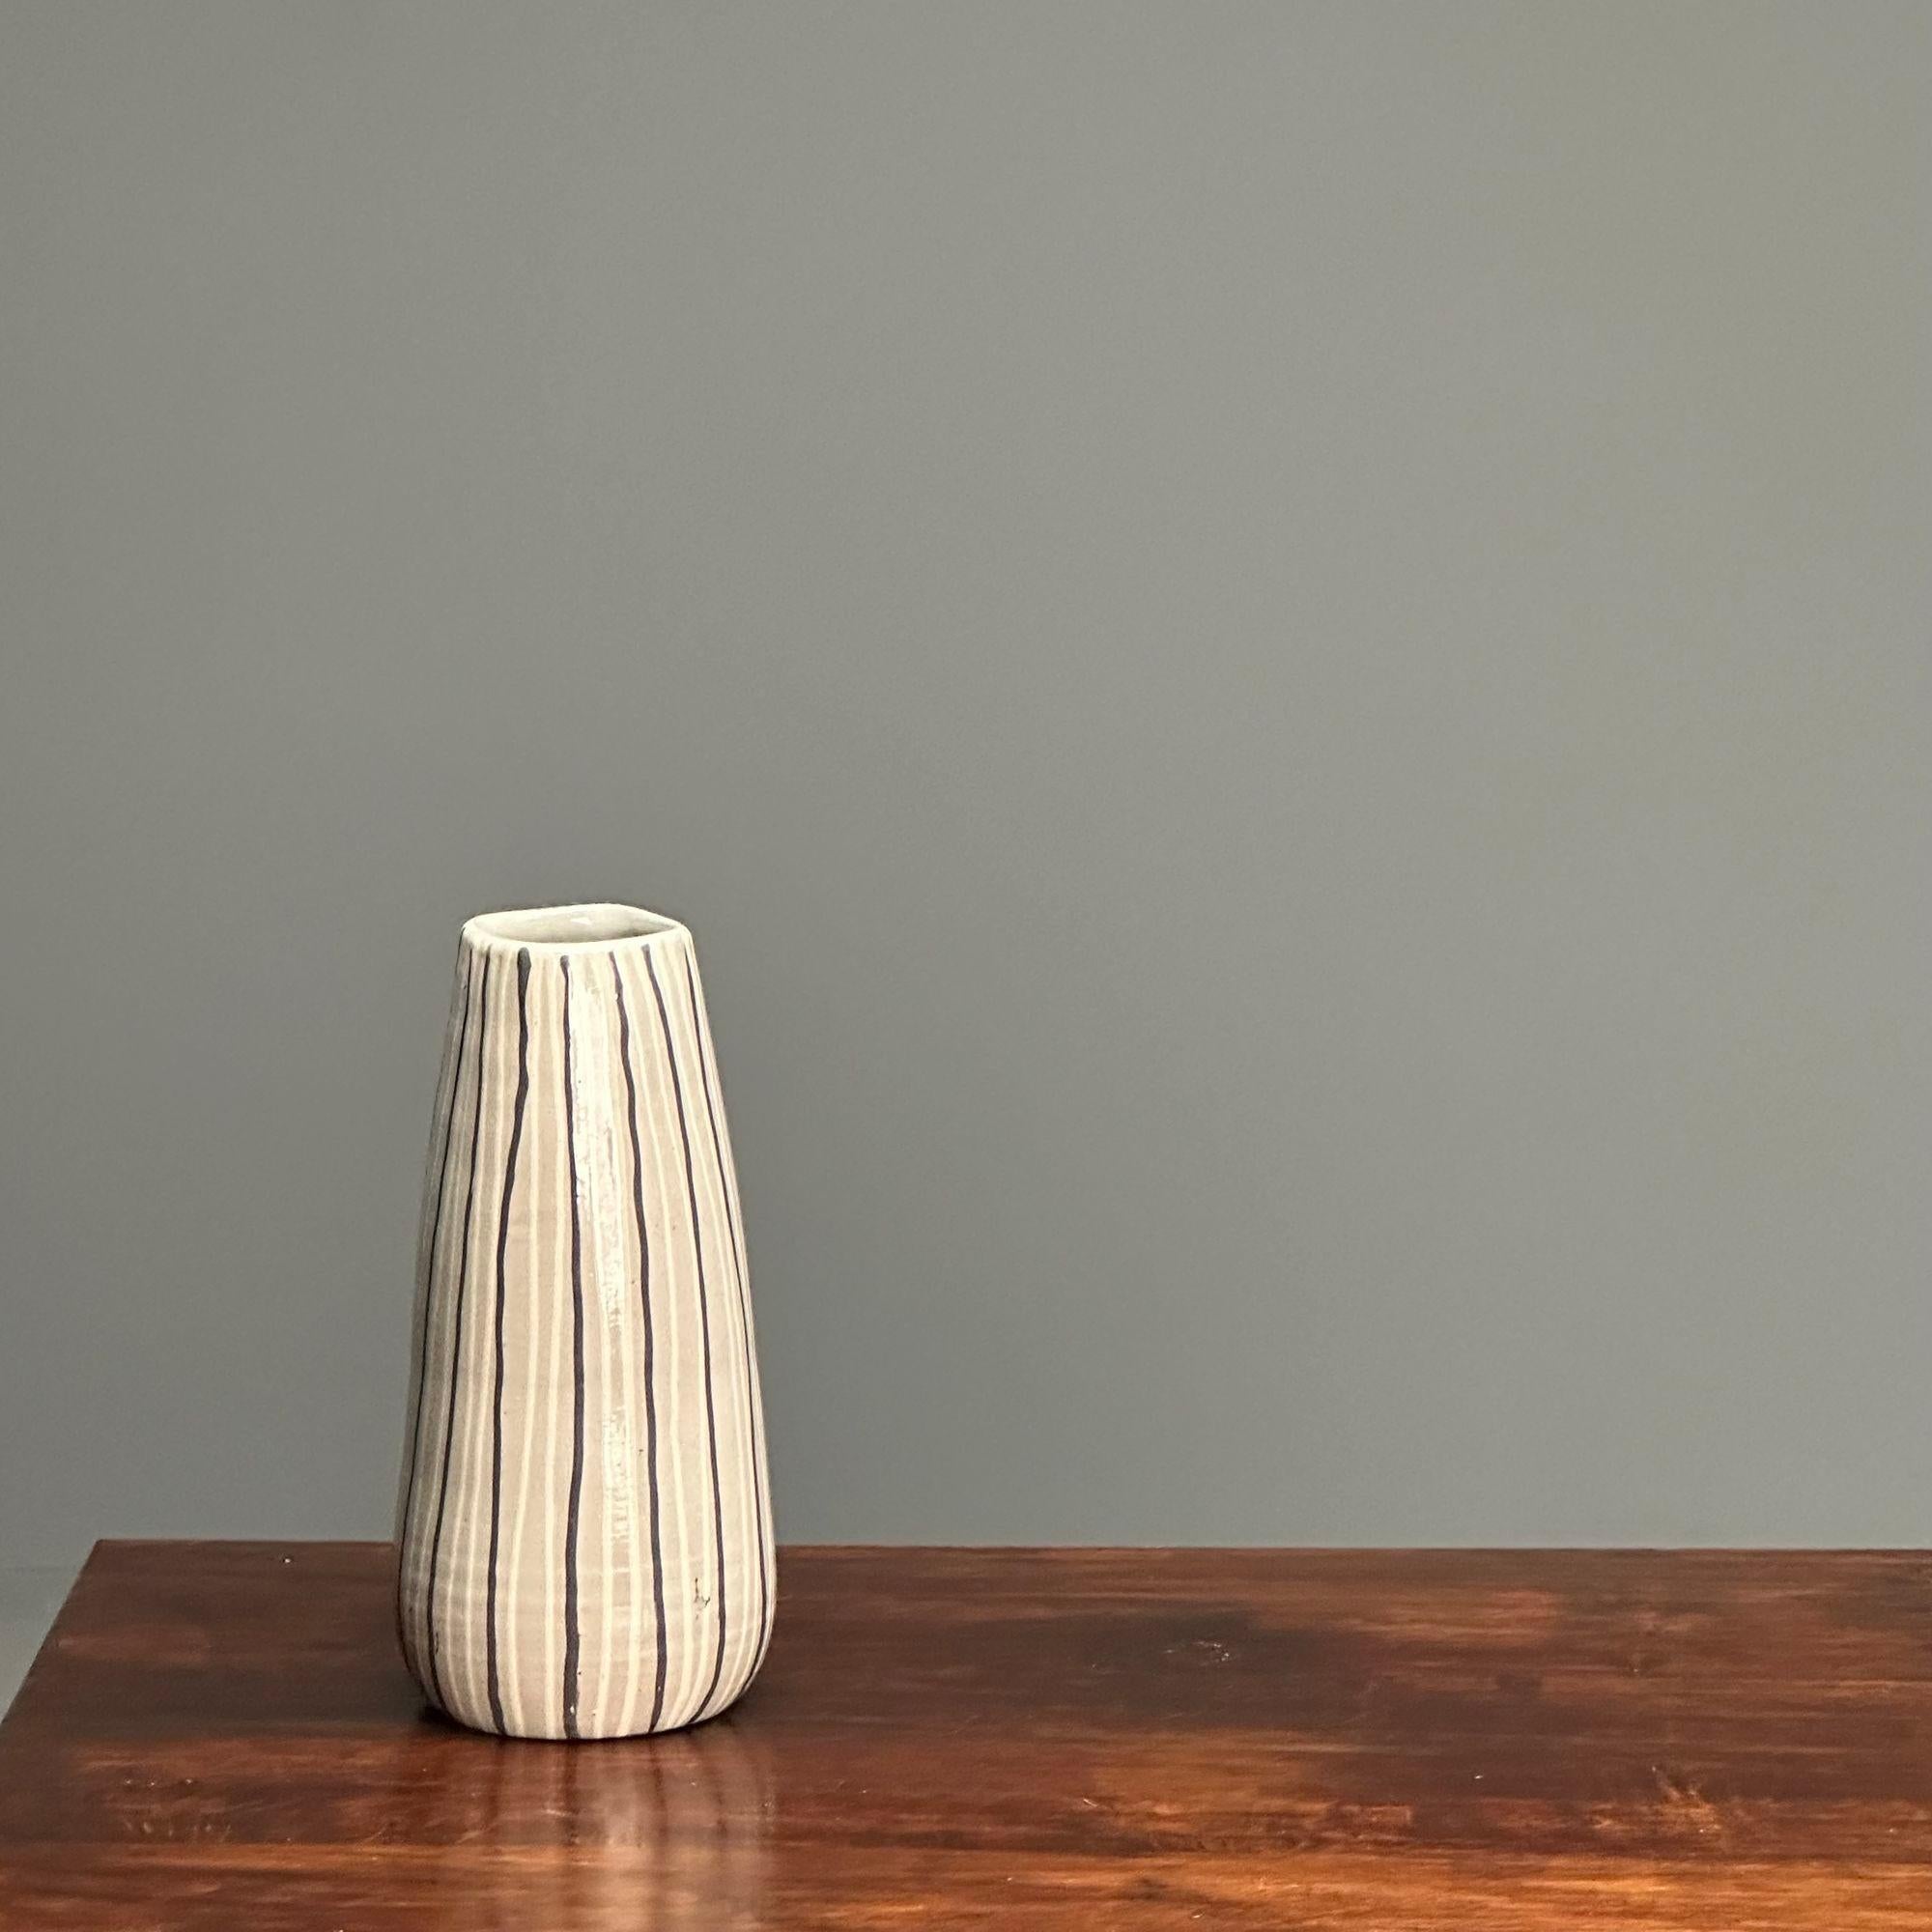 Ingrid Atterberg, Swedish Mid-Century Modern, Ceramic Vase, Ekeby, 20th C. In Good Condition For Sale In Stamford, CT